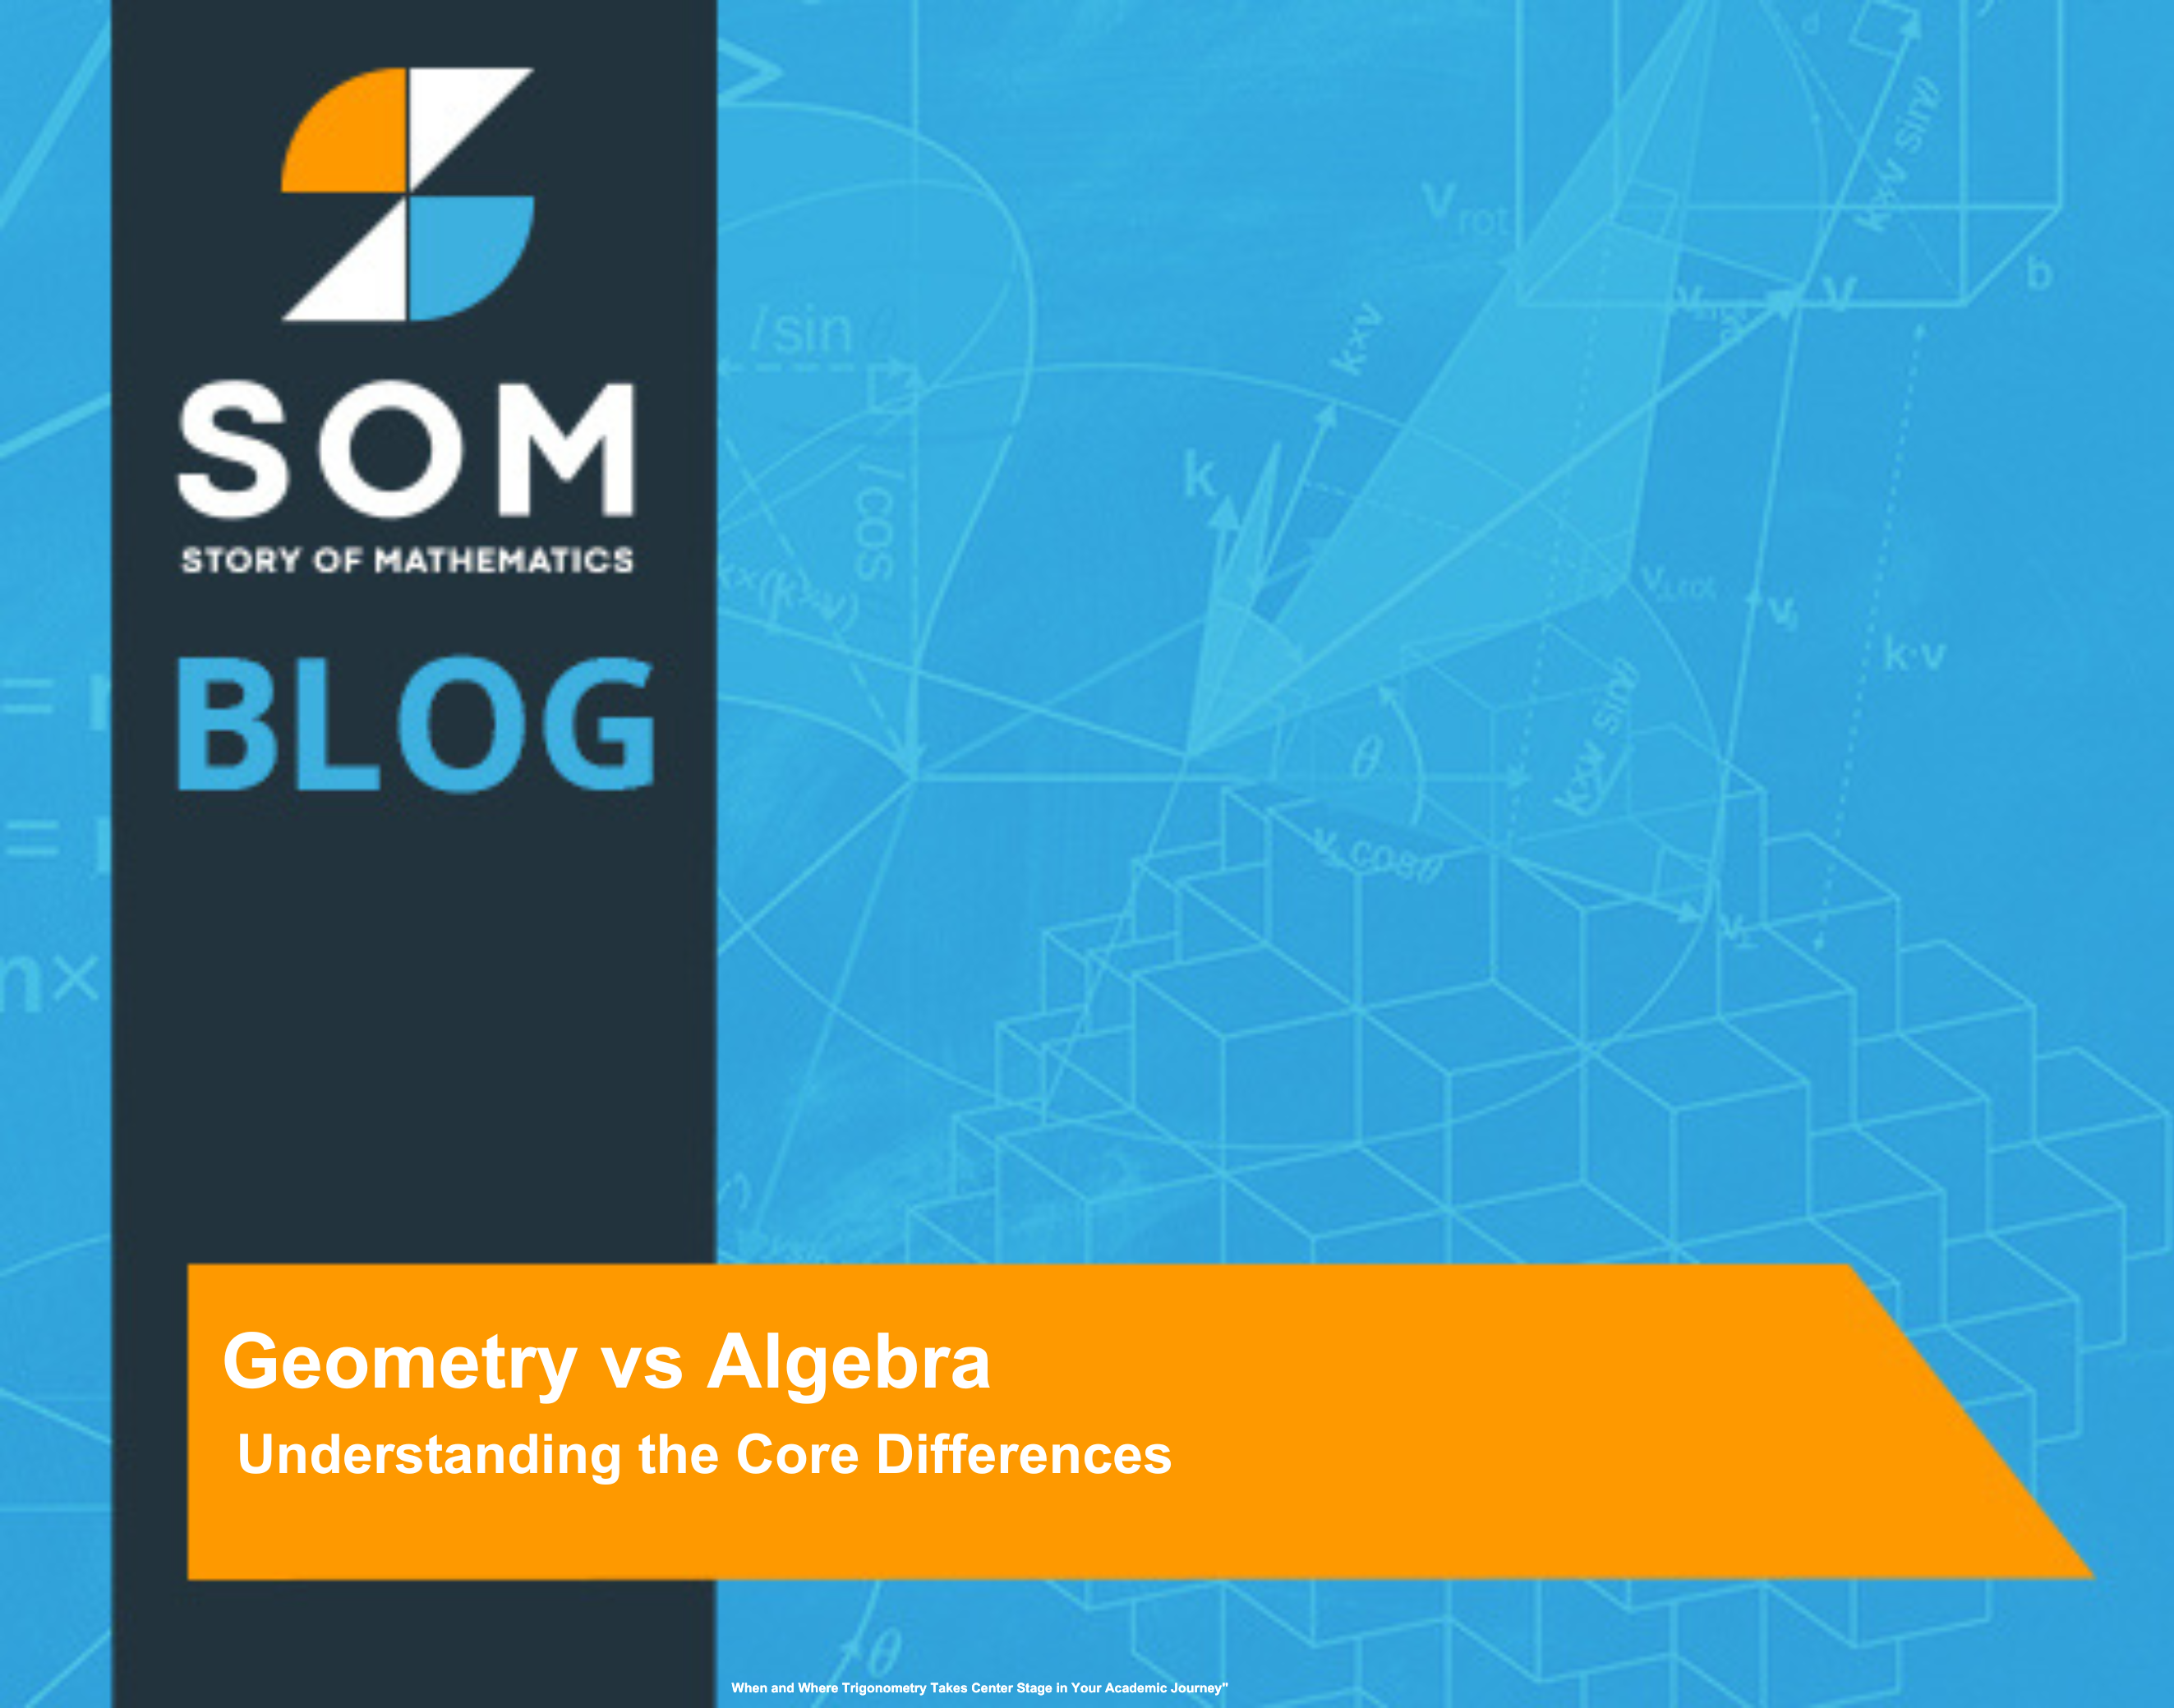 Feature Image Geometry vs Algebra Understanding the Core Differences